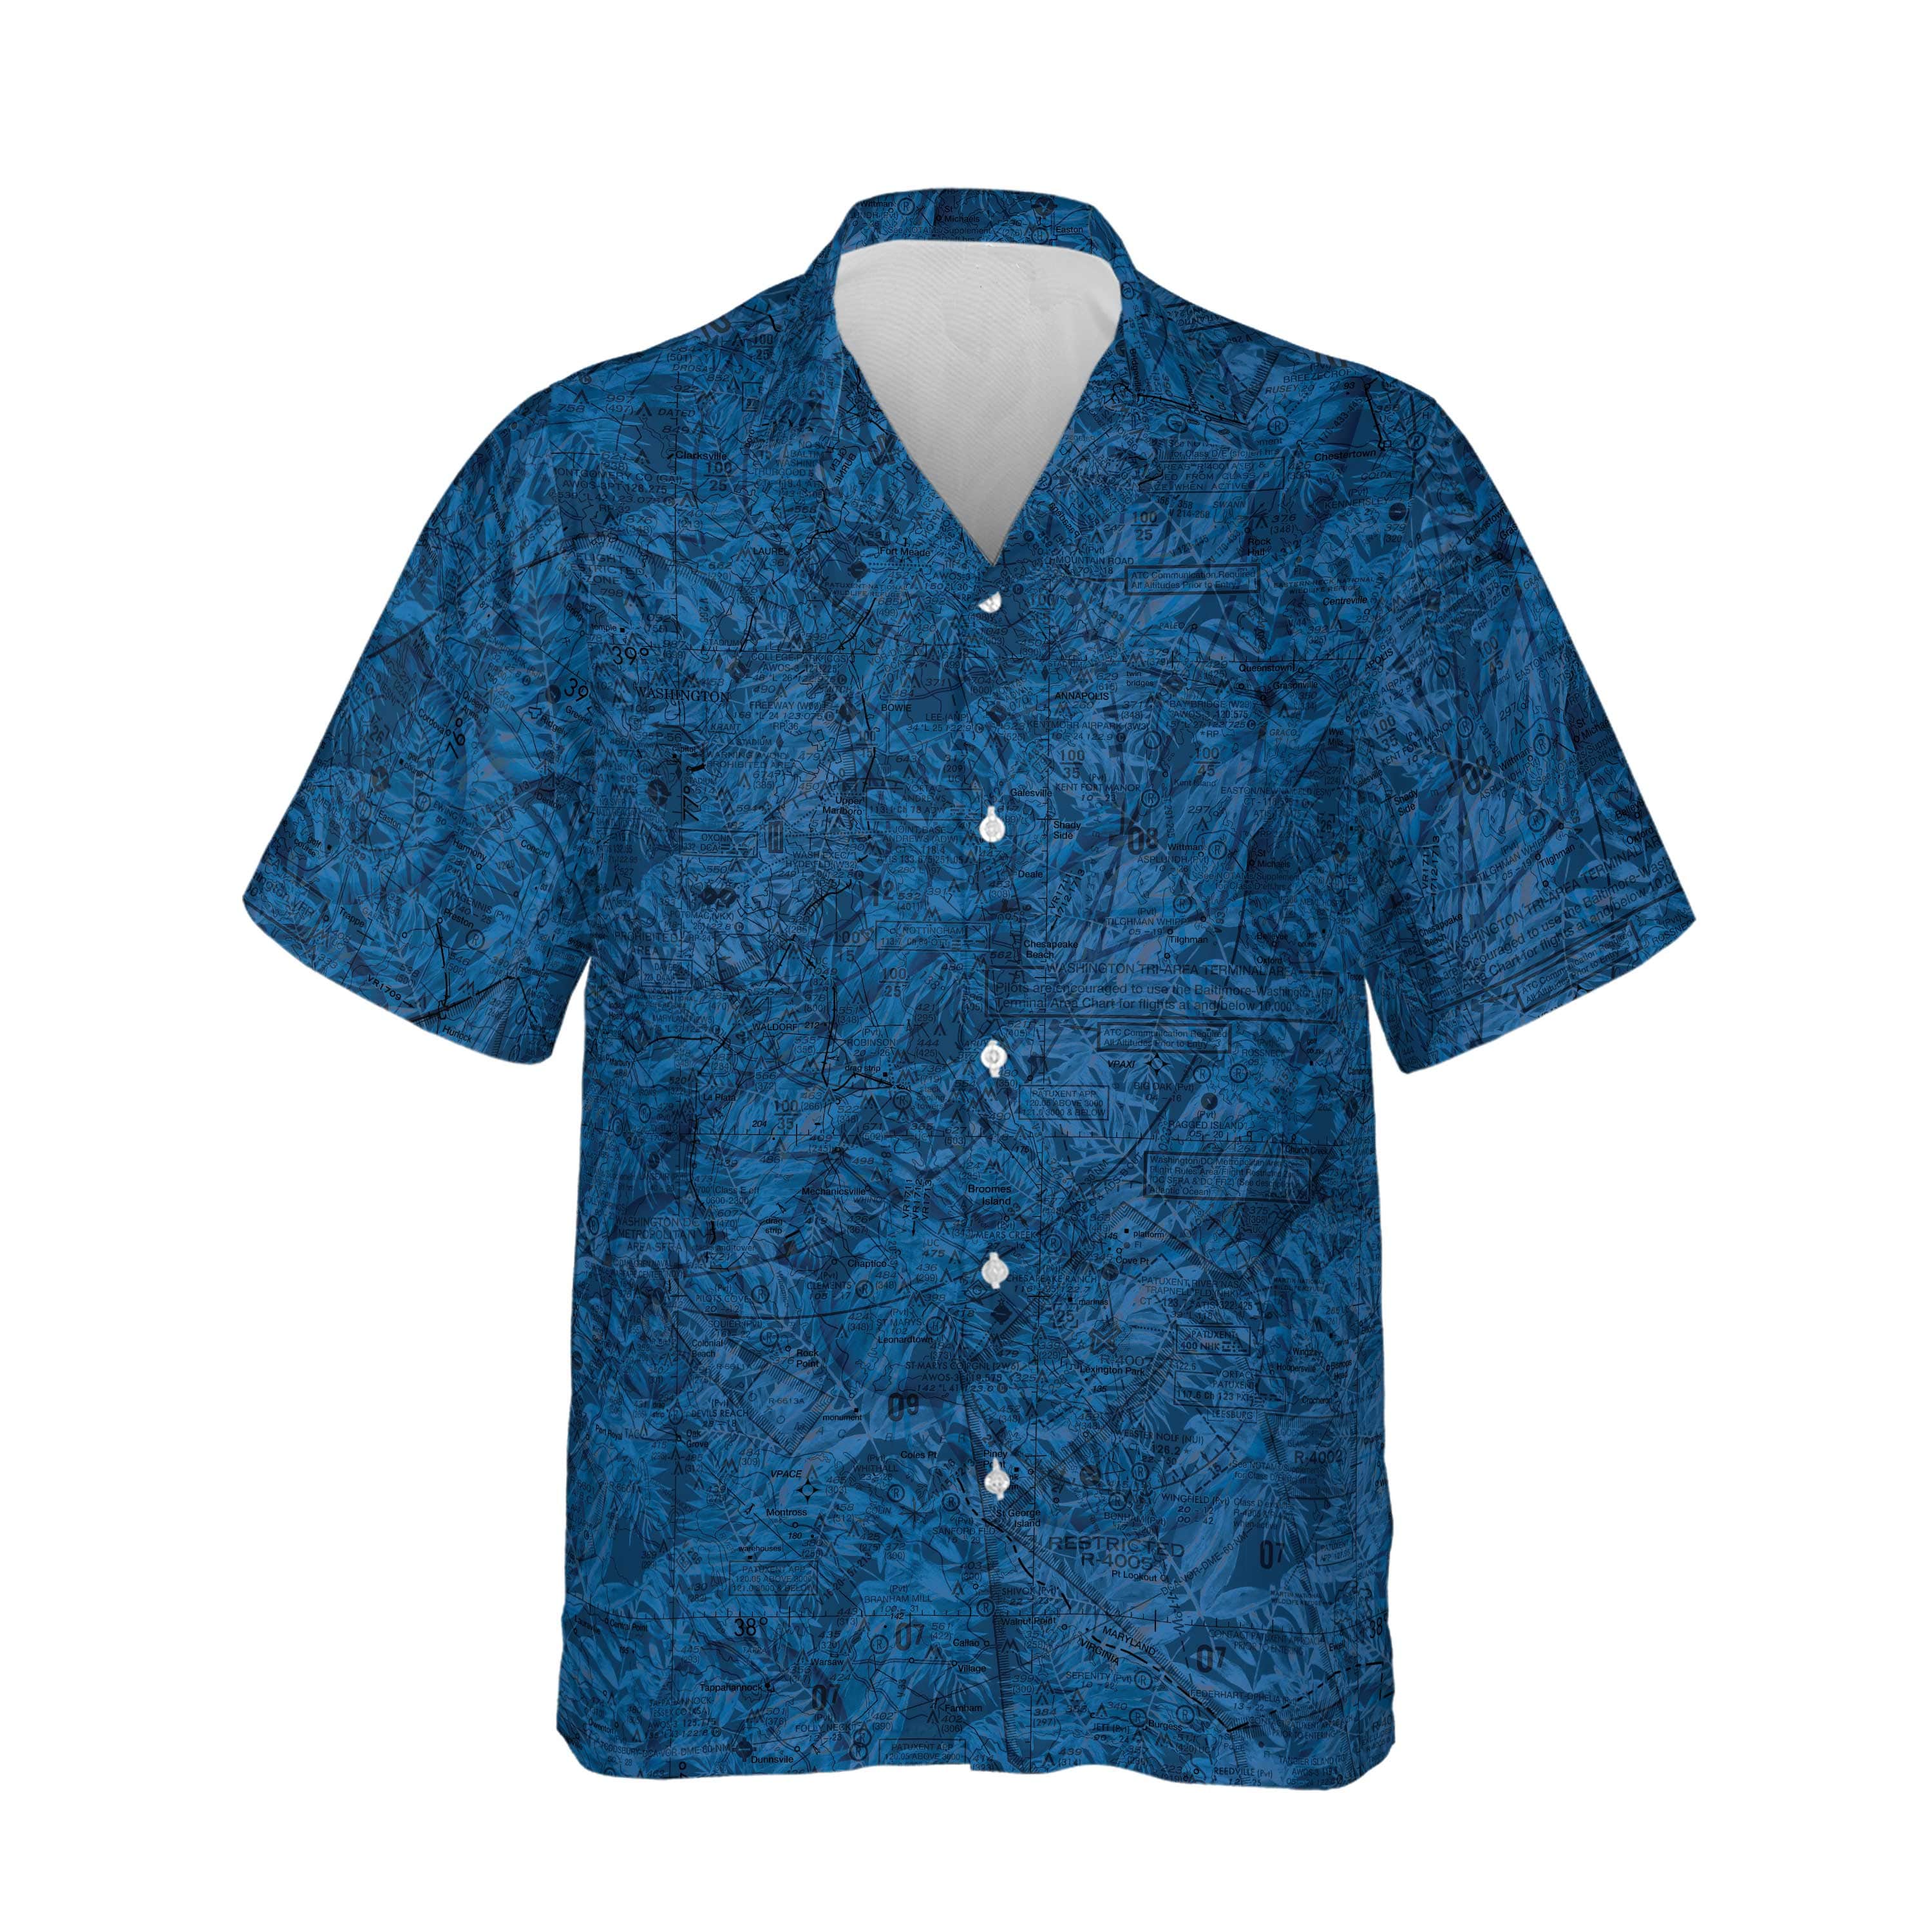 Men's Hawaiian Shirts for sale in Baltimore, Maryland